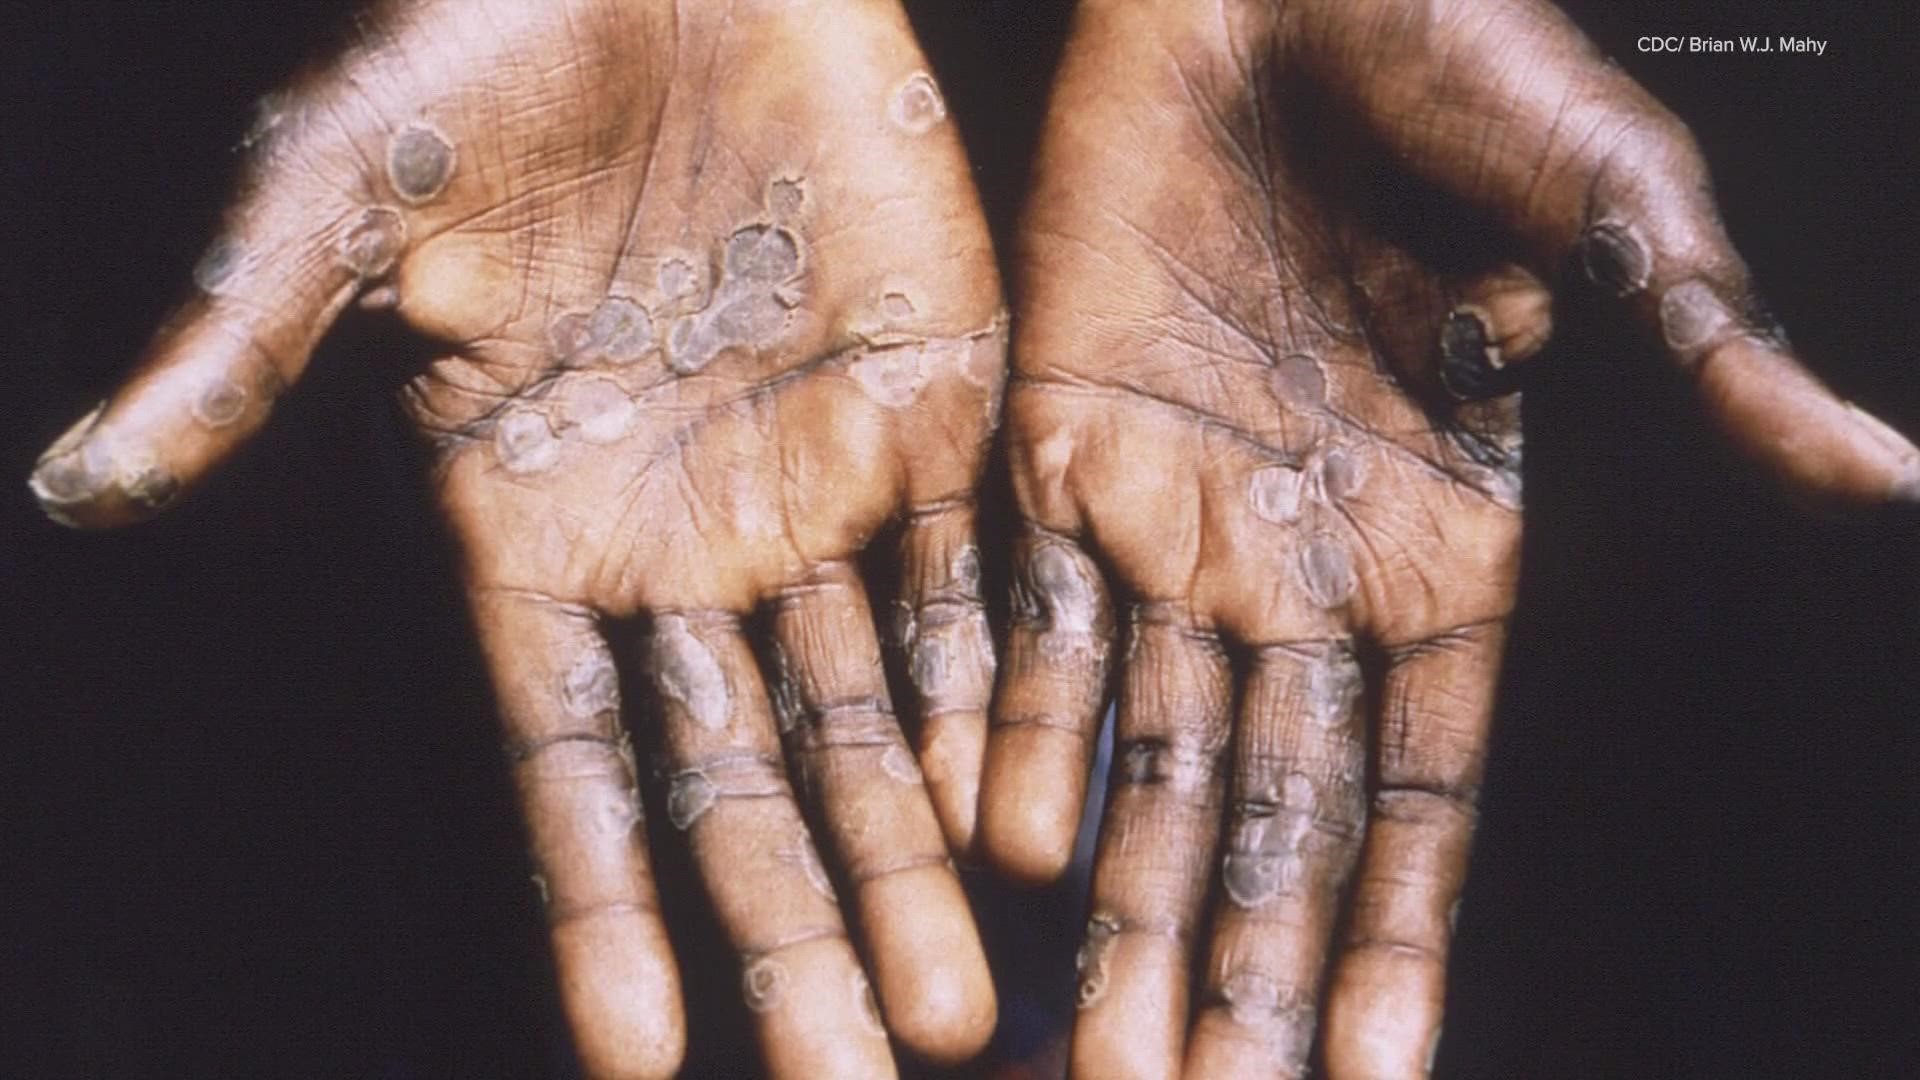 Louisiana now has it's first case of Monkeypox and it's right here in the New Orleans area.